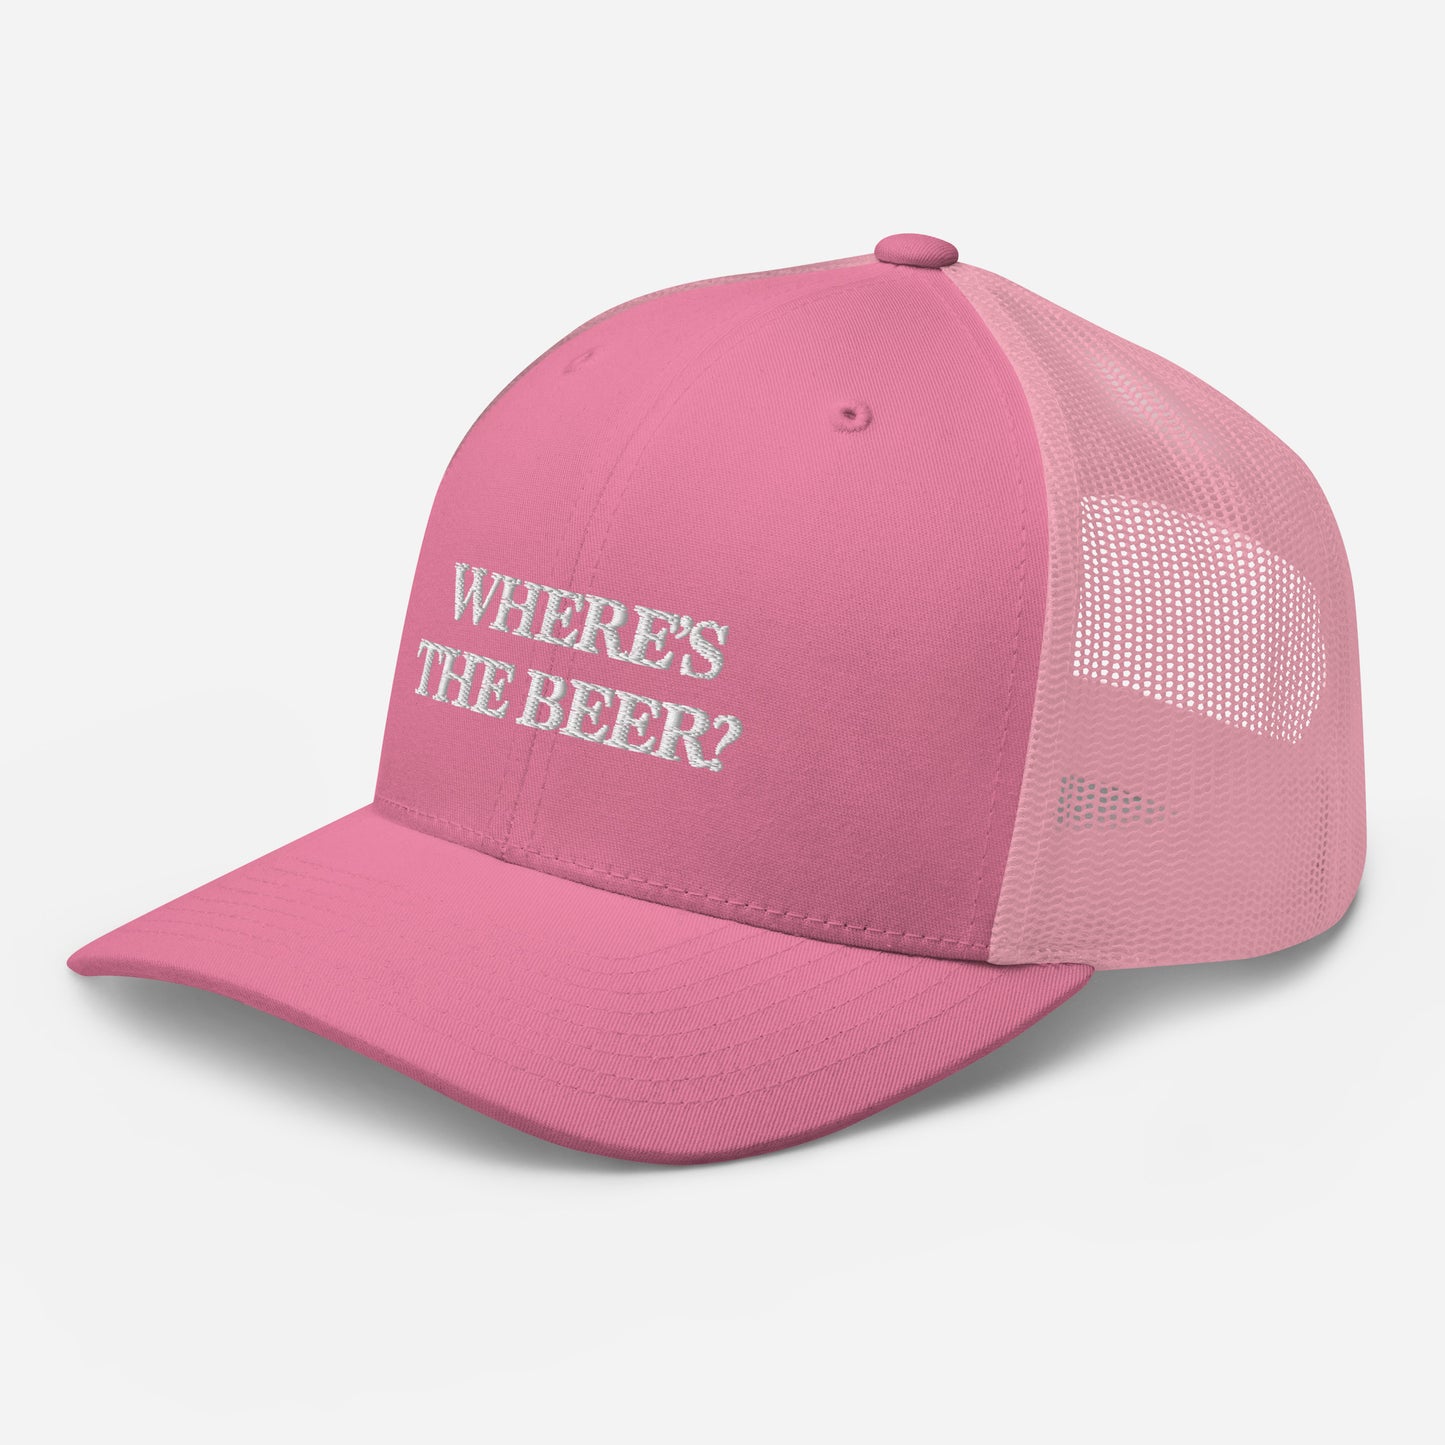 Where's the Beers Trucker Hat